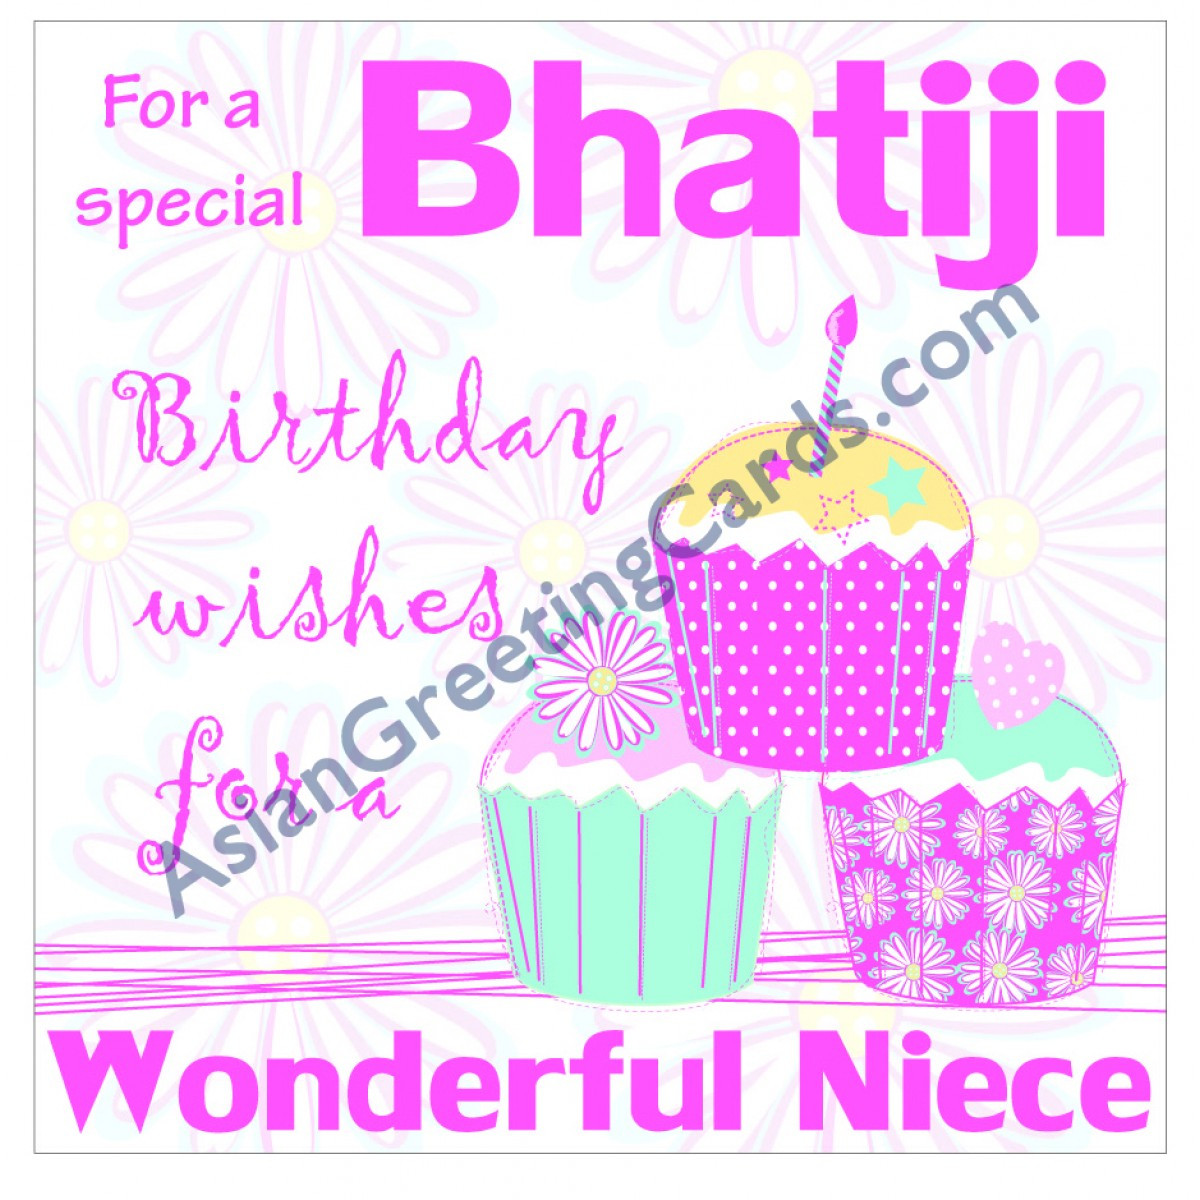 Niece Birthday Quotes
 Funny Birthday Quotes For Niece QuotesGram